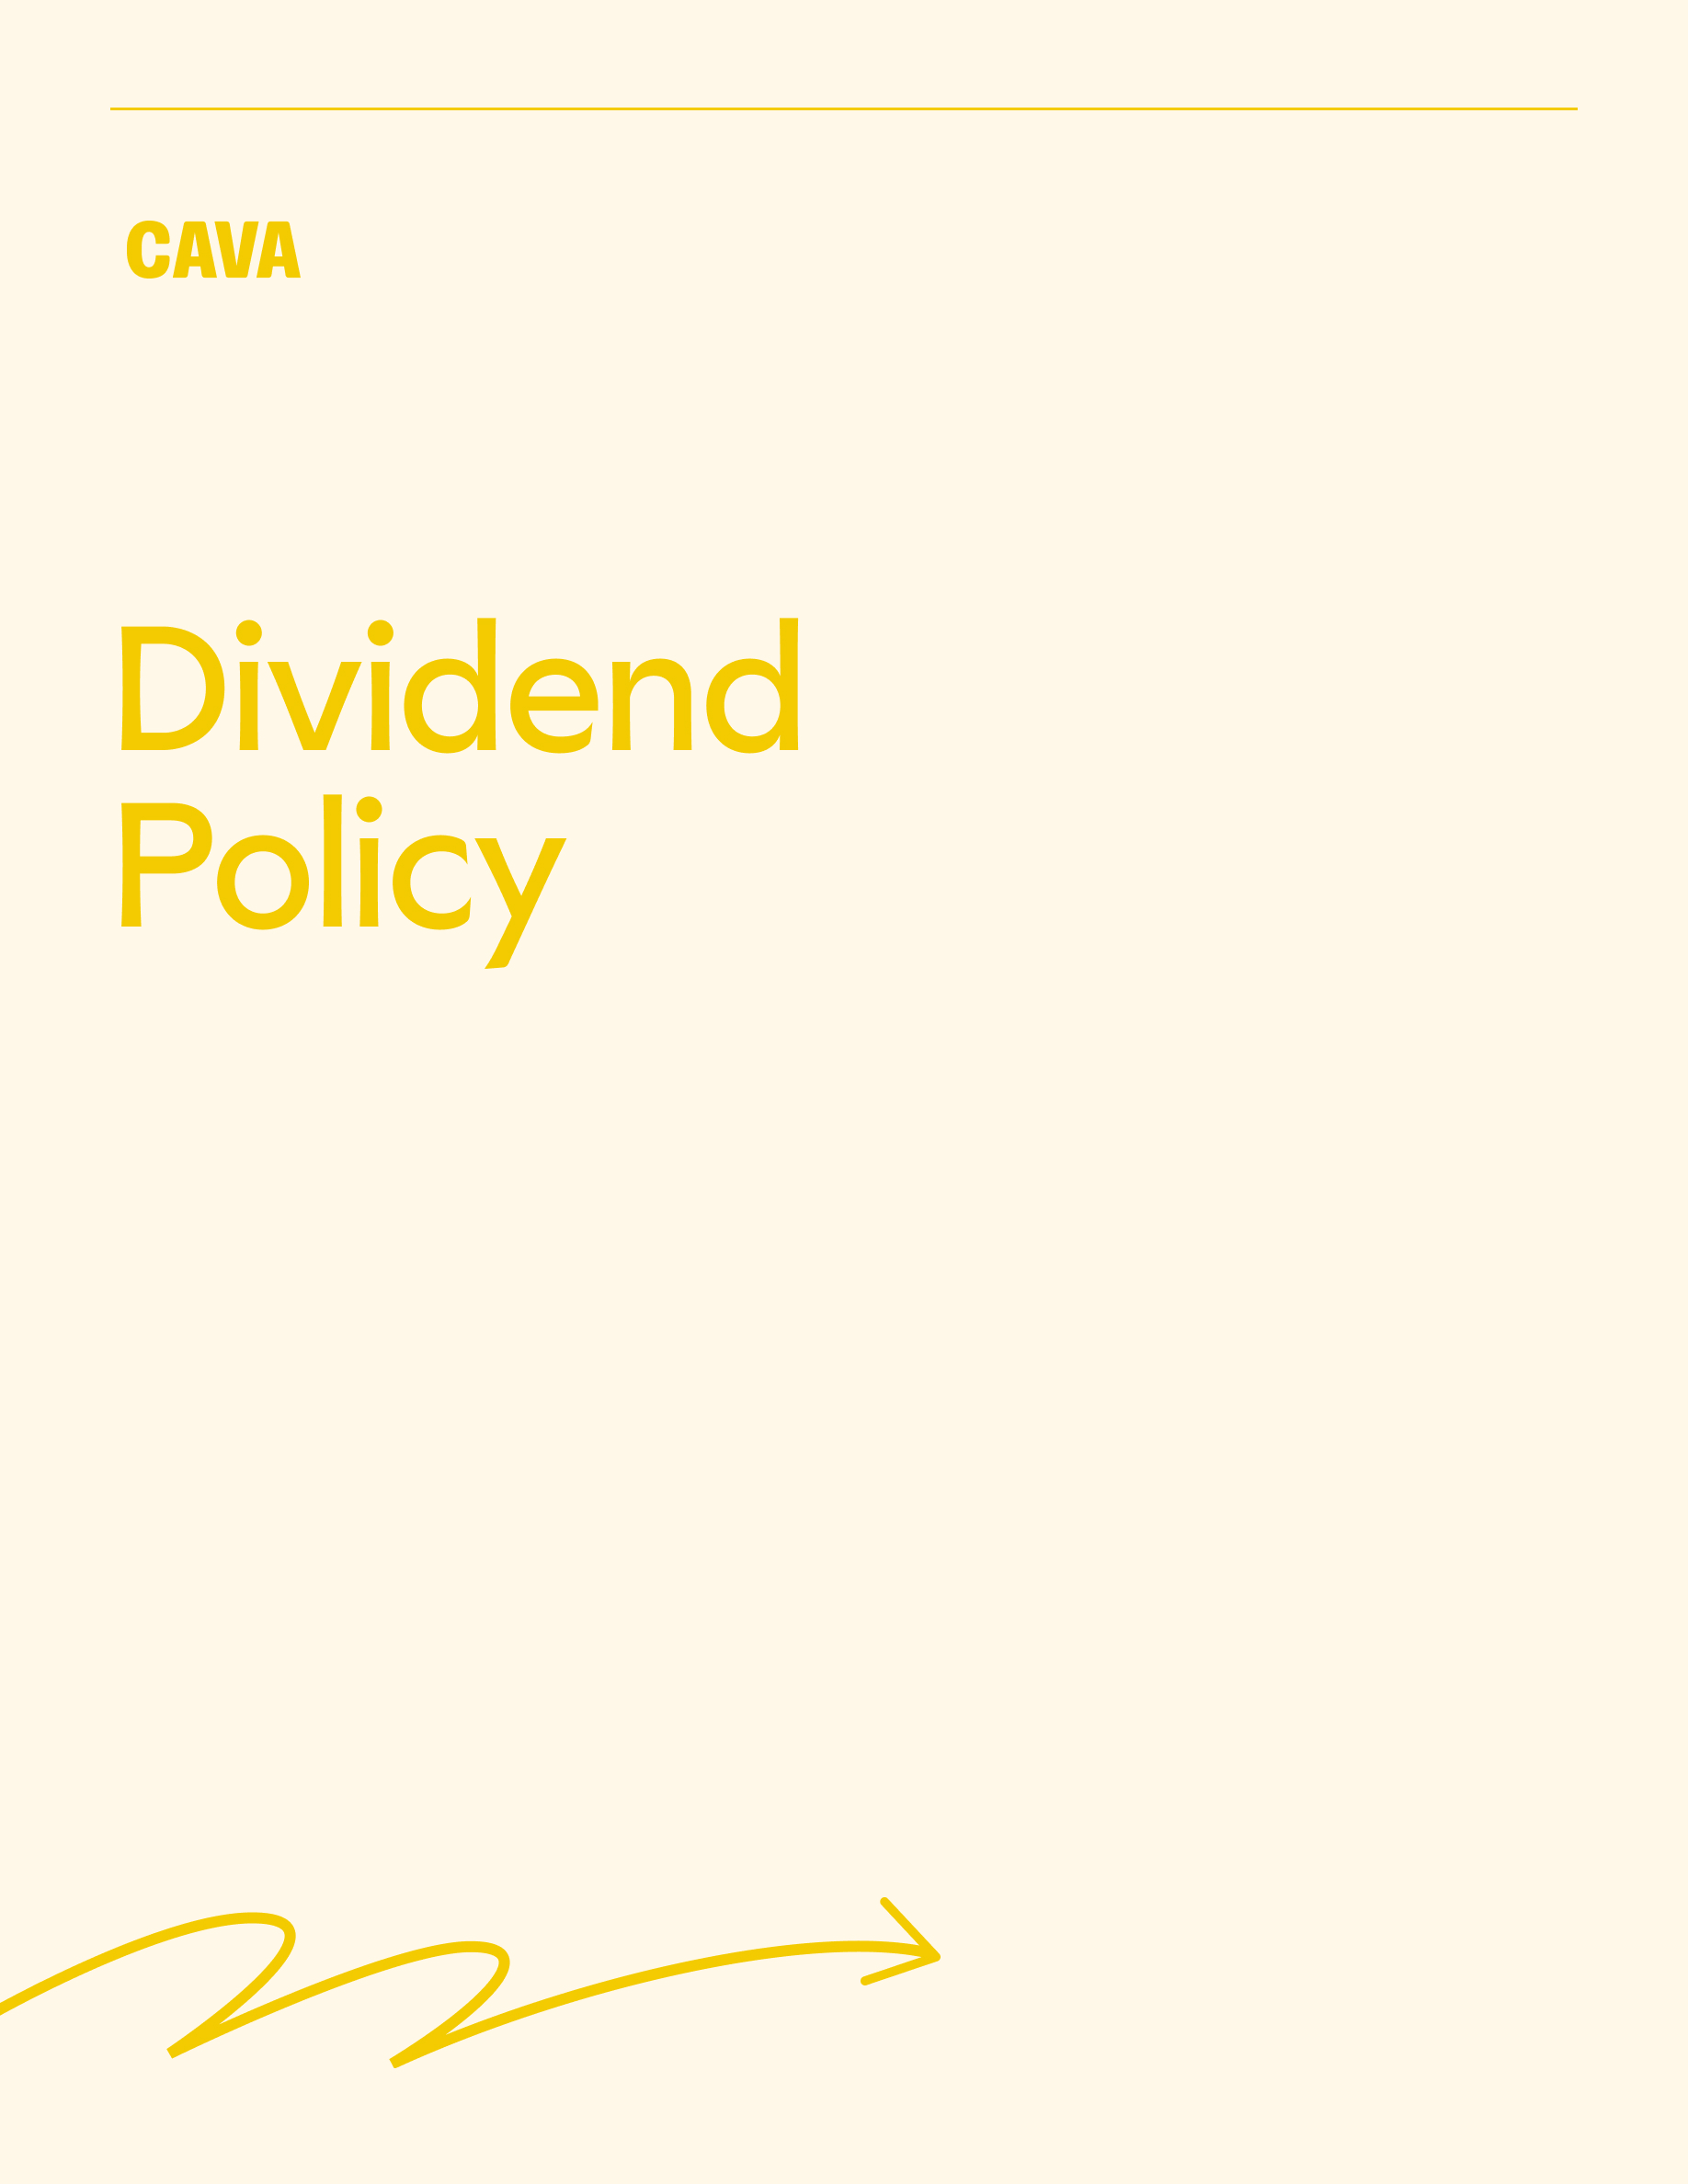 dividendpolicycover1a.jpg